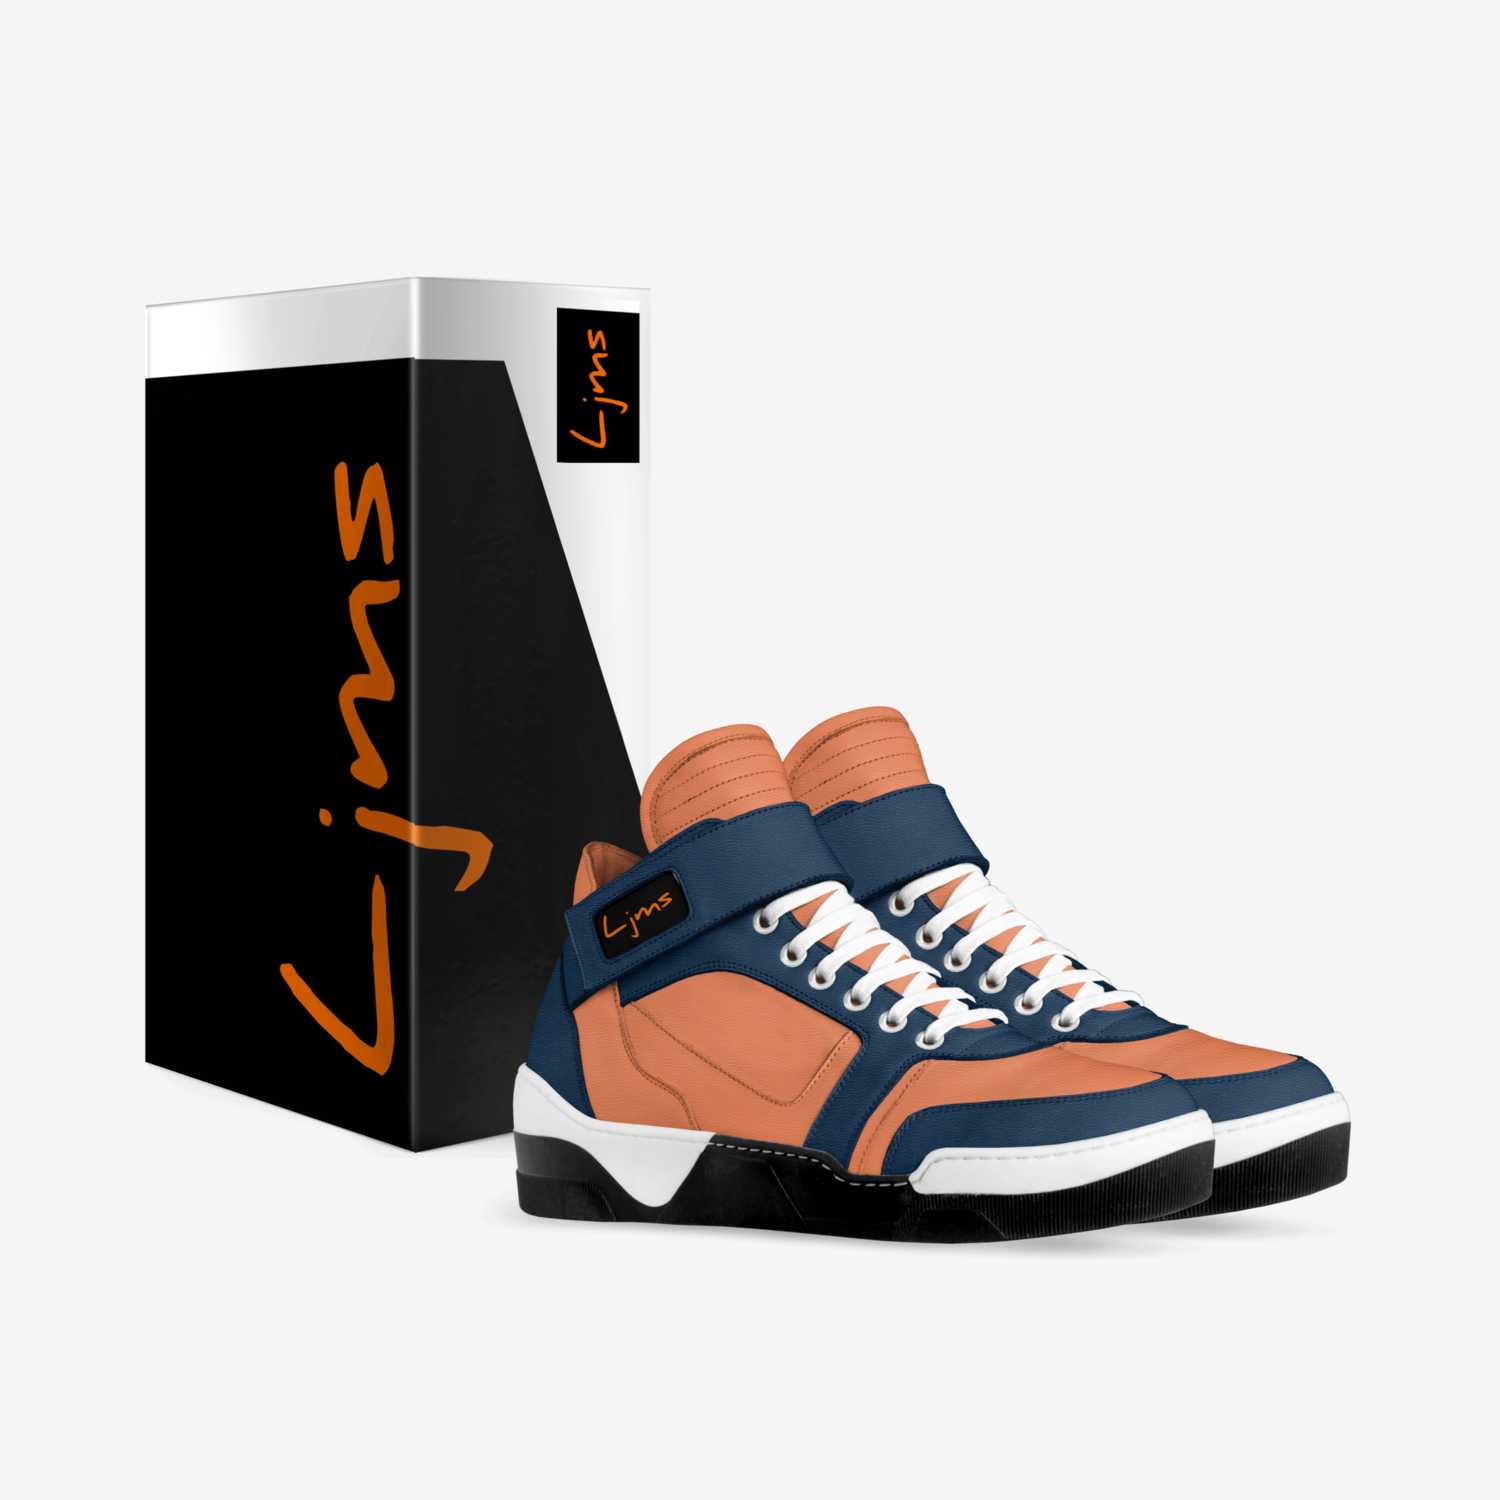 Ljms-2 custom made in Italy shoes by Ljms Fashion | Box view